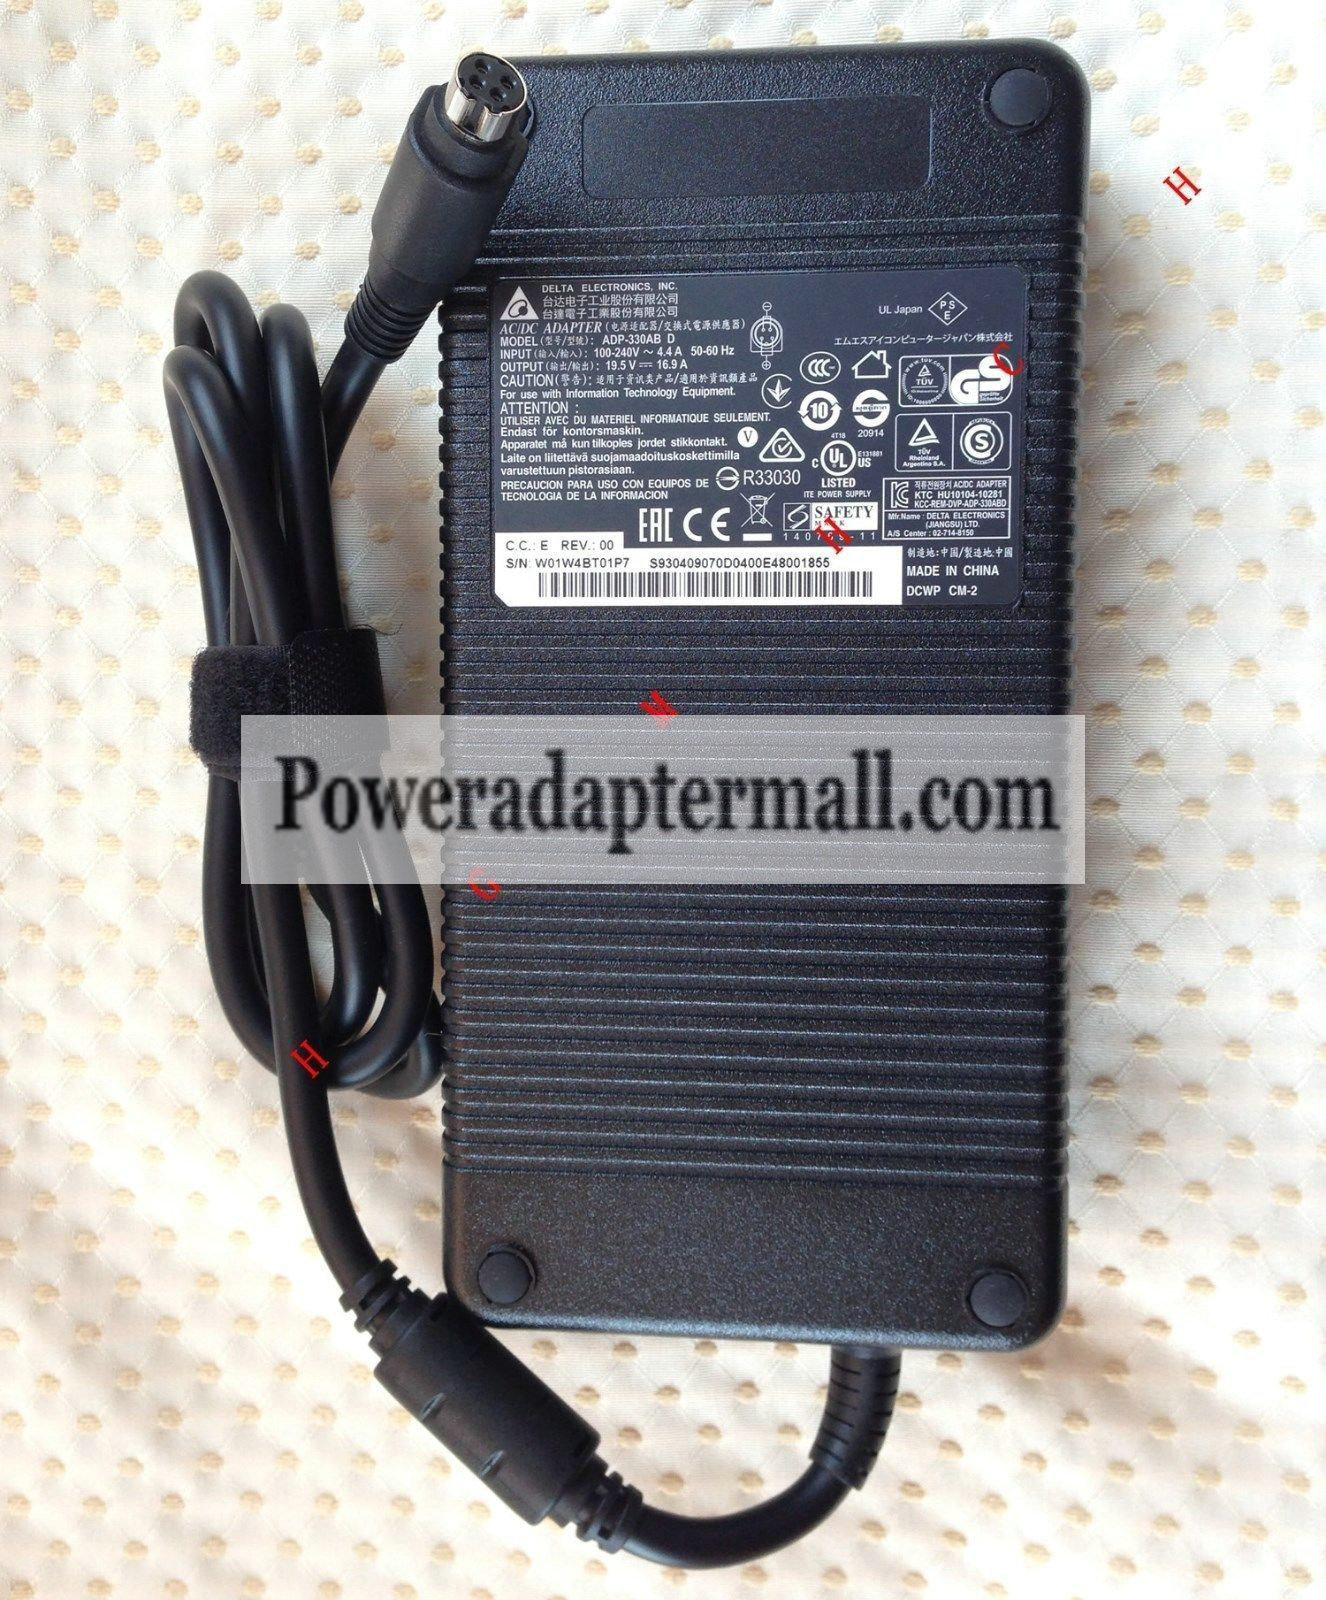 NEW Clevo ADP-330AB D 19.5V 16.9A 330W AC Adapter 4pin